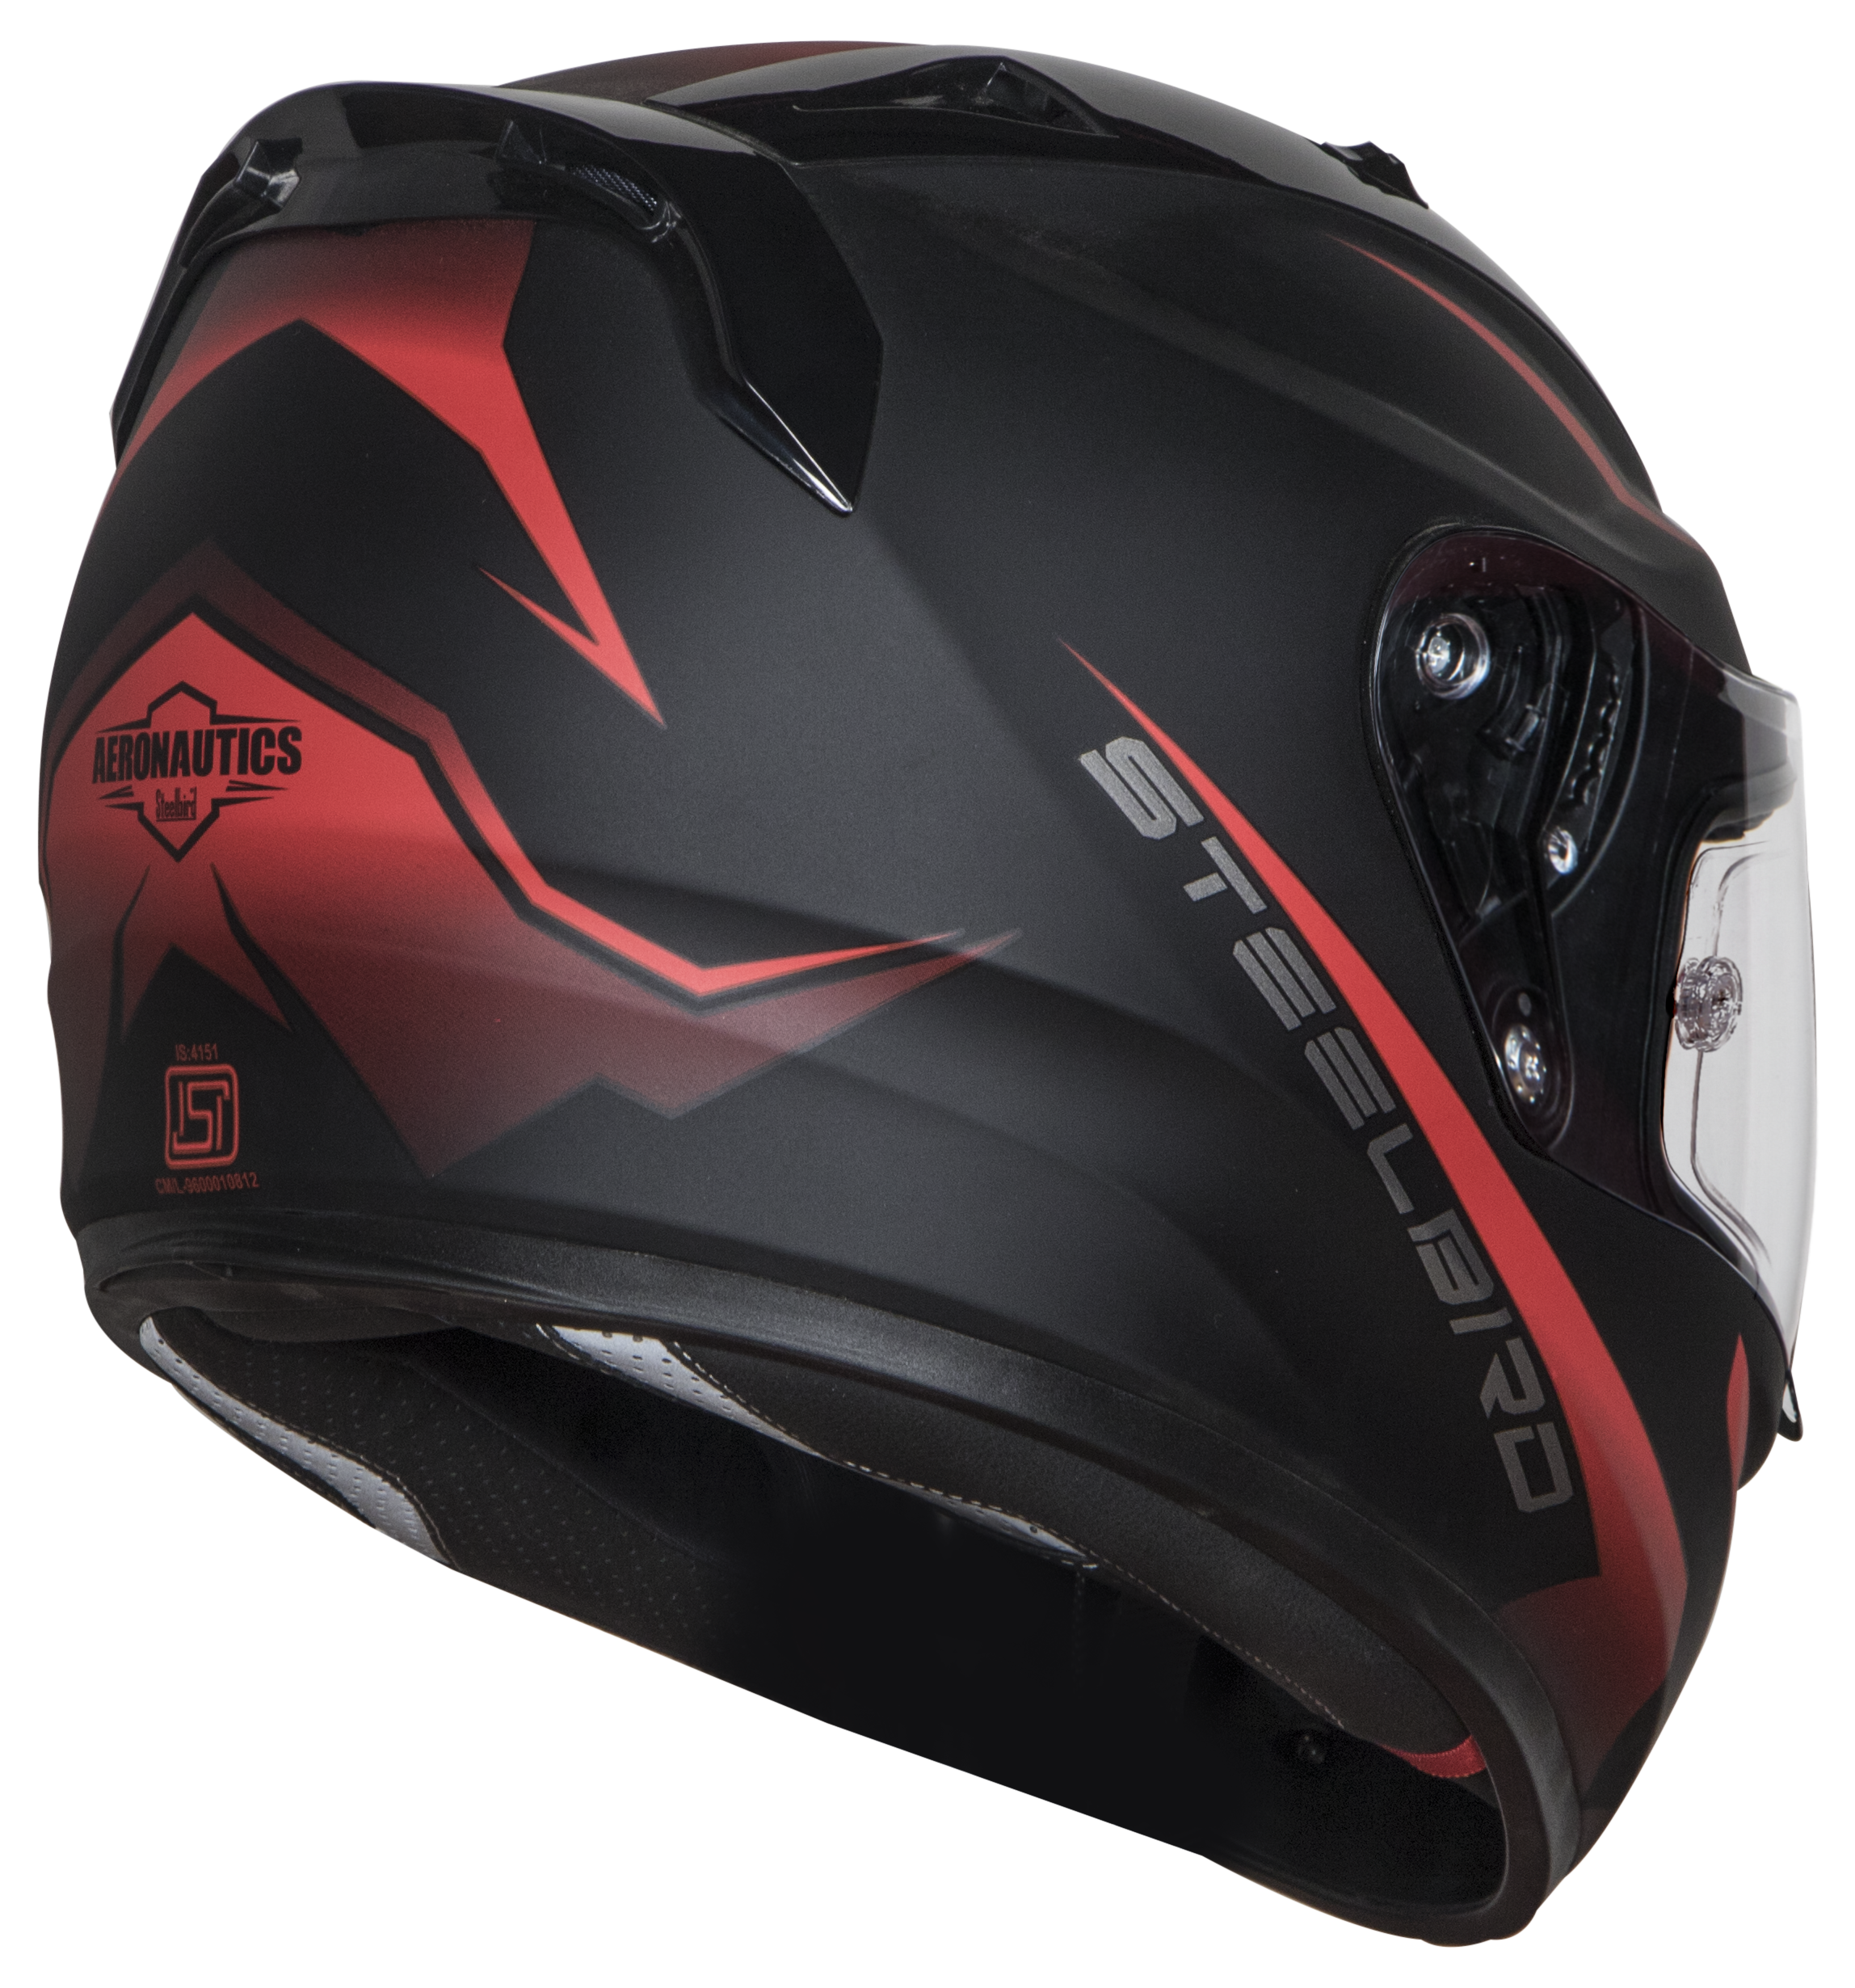 SA-1 WHIF Mat Black/Red (Fitted With Clear Visor Extra Anti-Fog Shield Night Vision Green Visor Free)